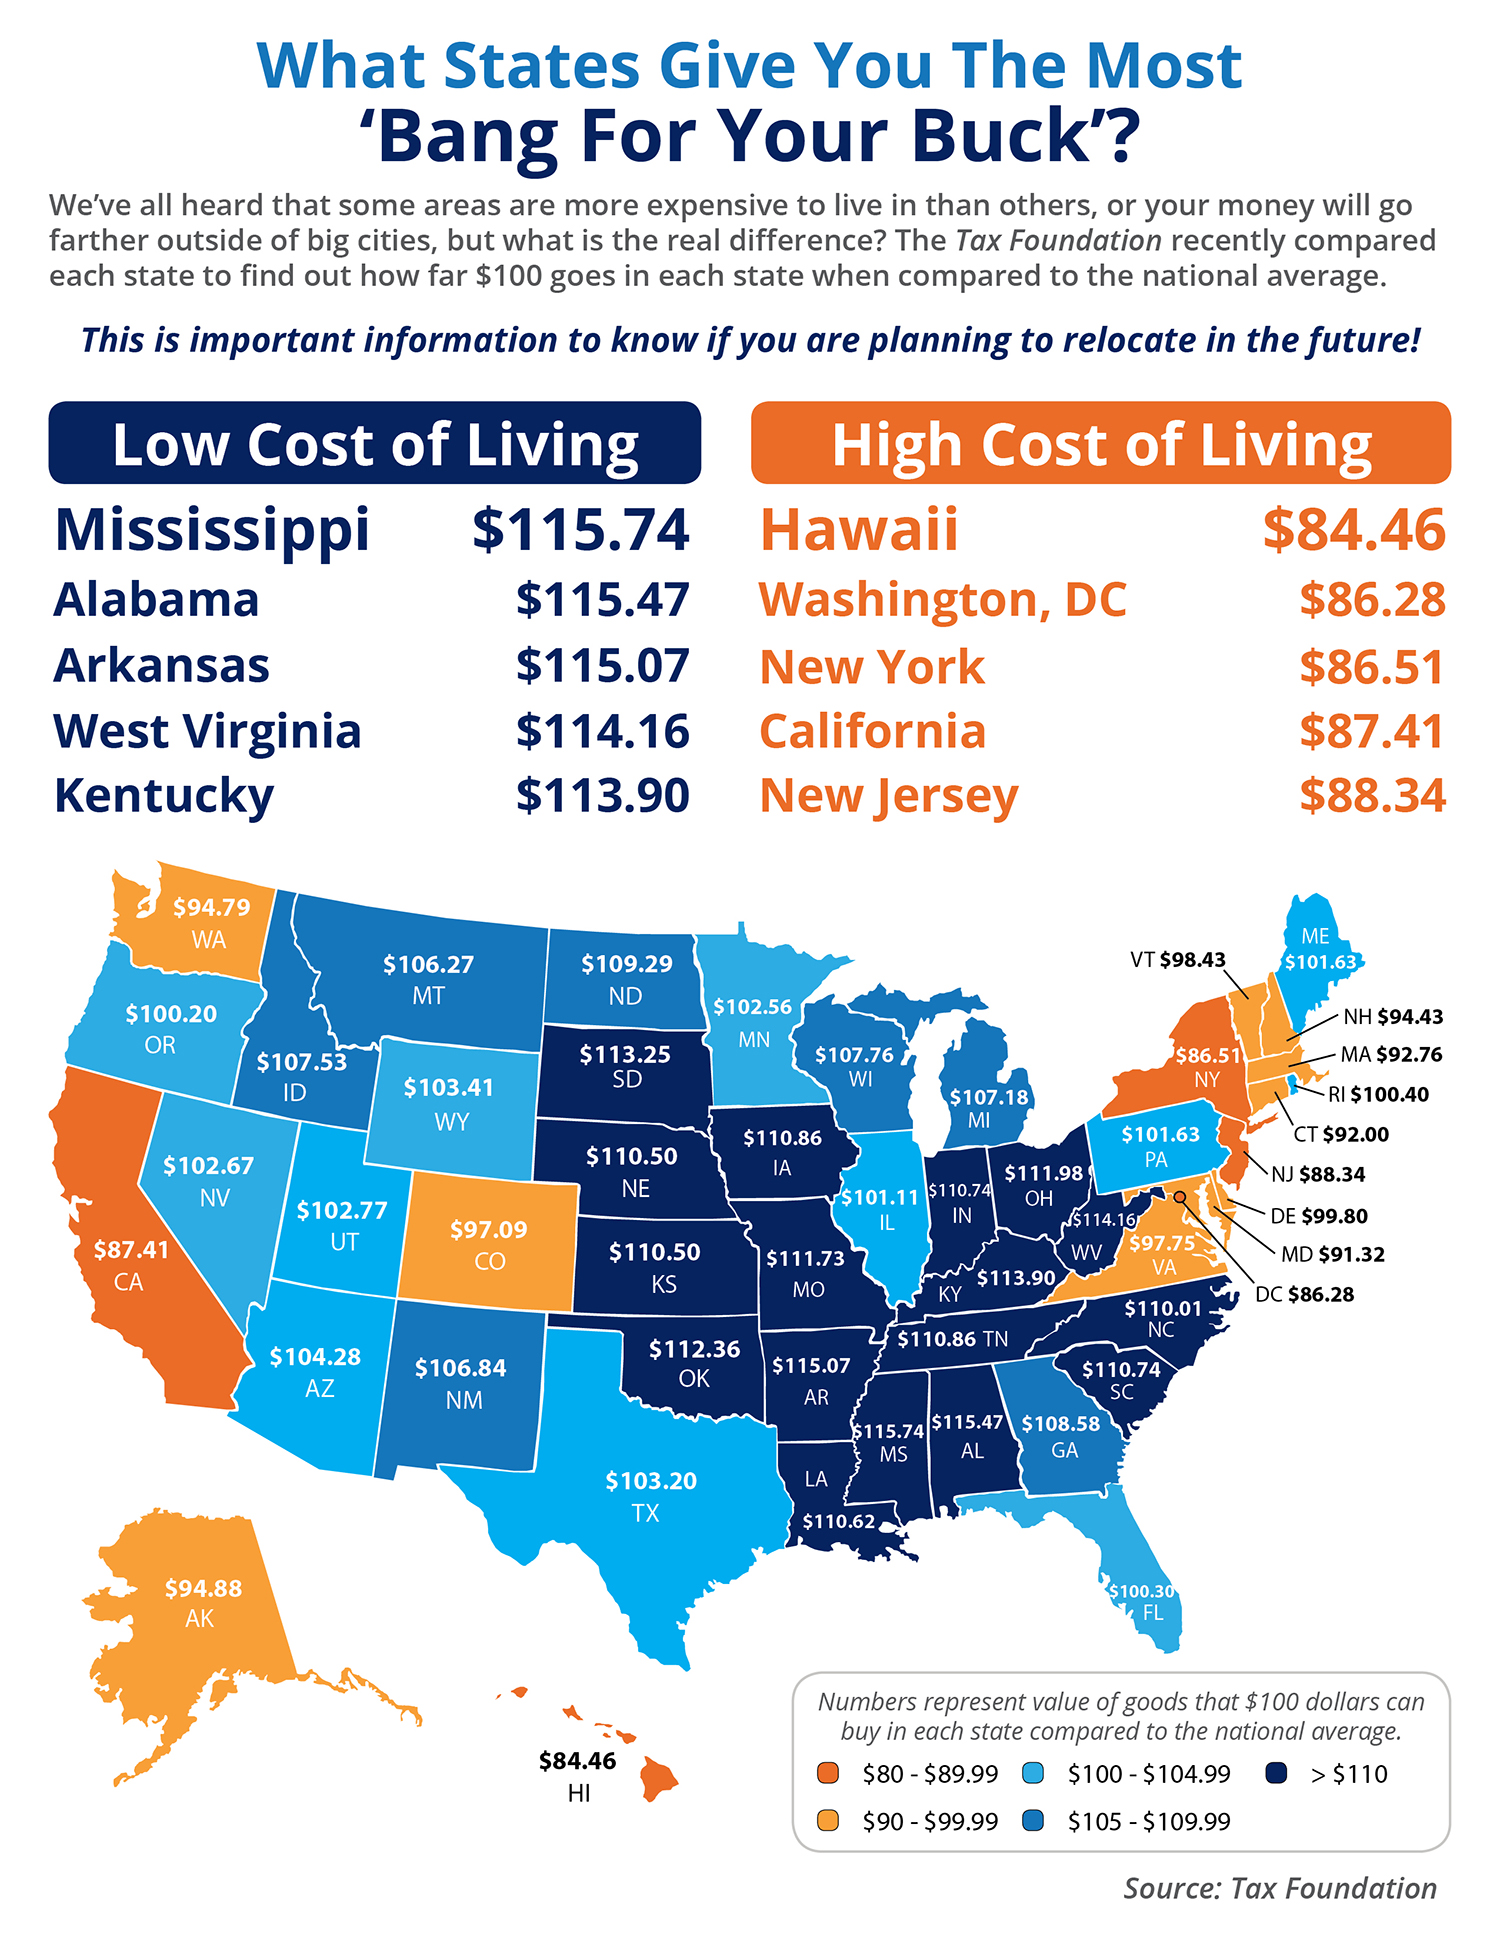 What State Gives You the Most ‘Bang for Your Buck’? [INFOGRAPHIC]